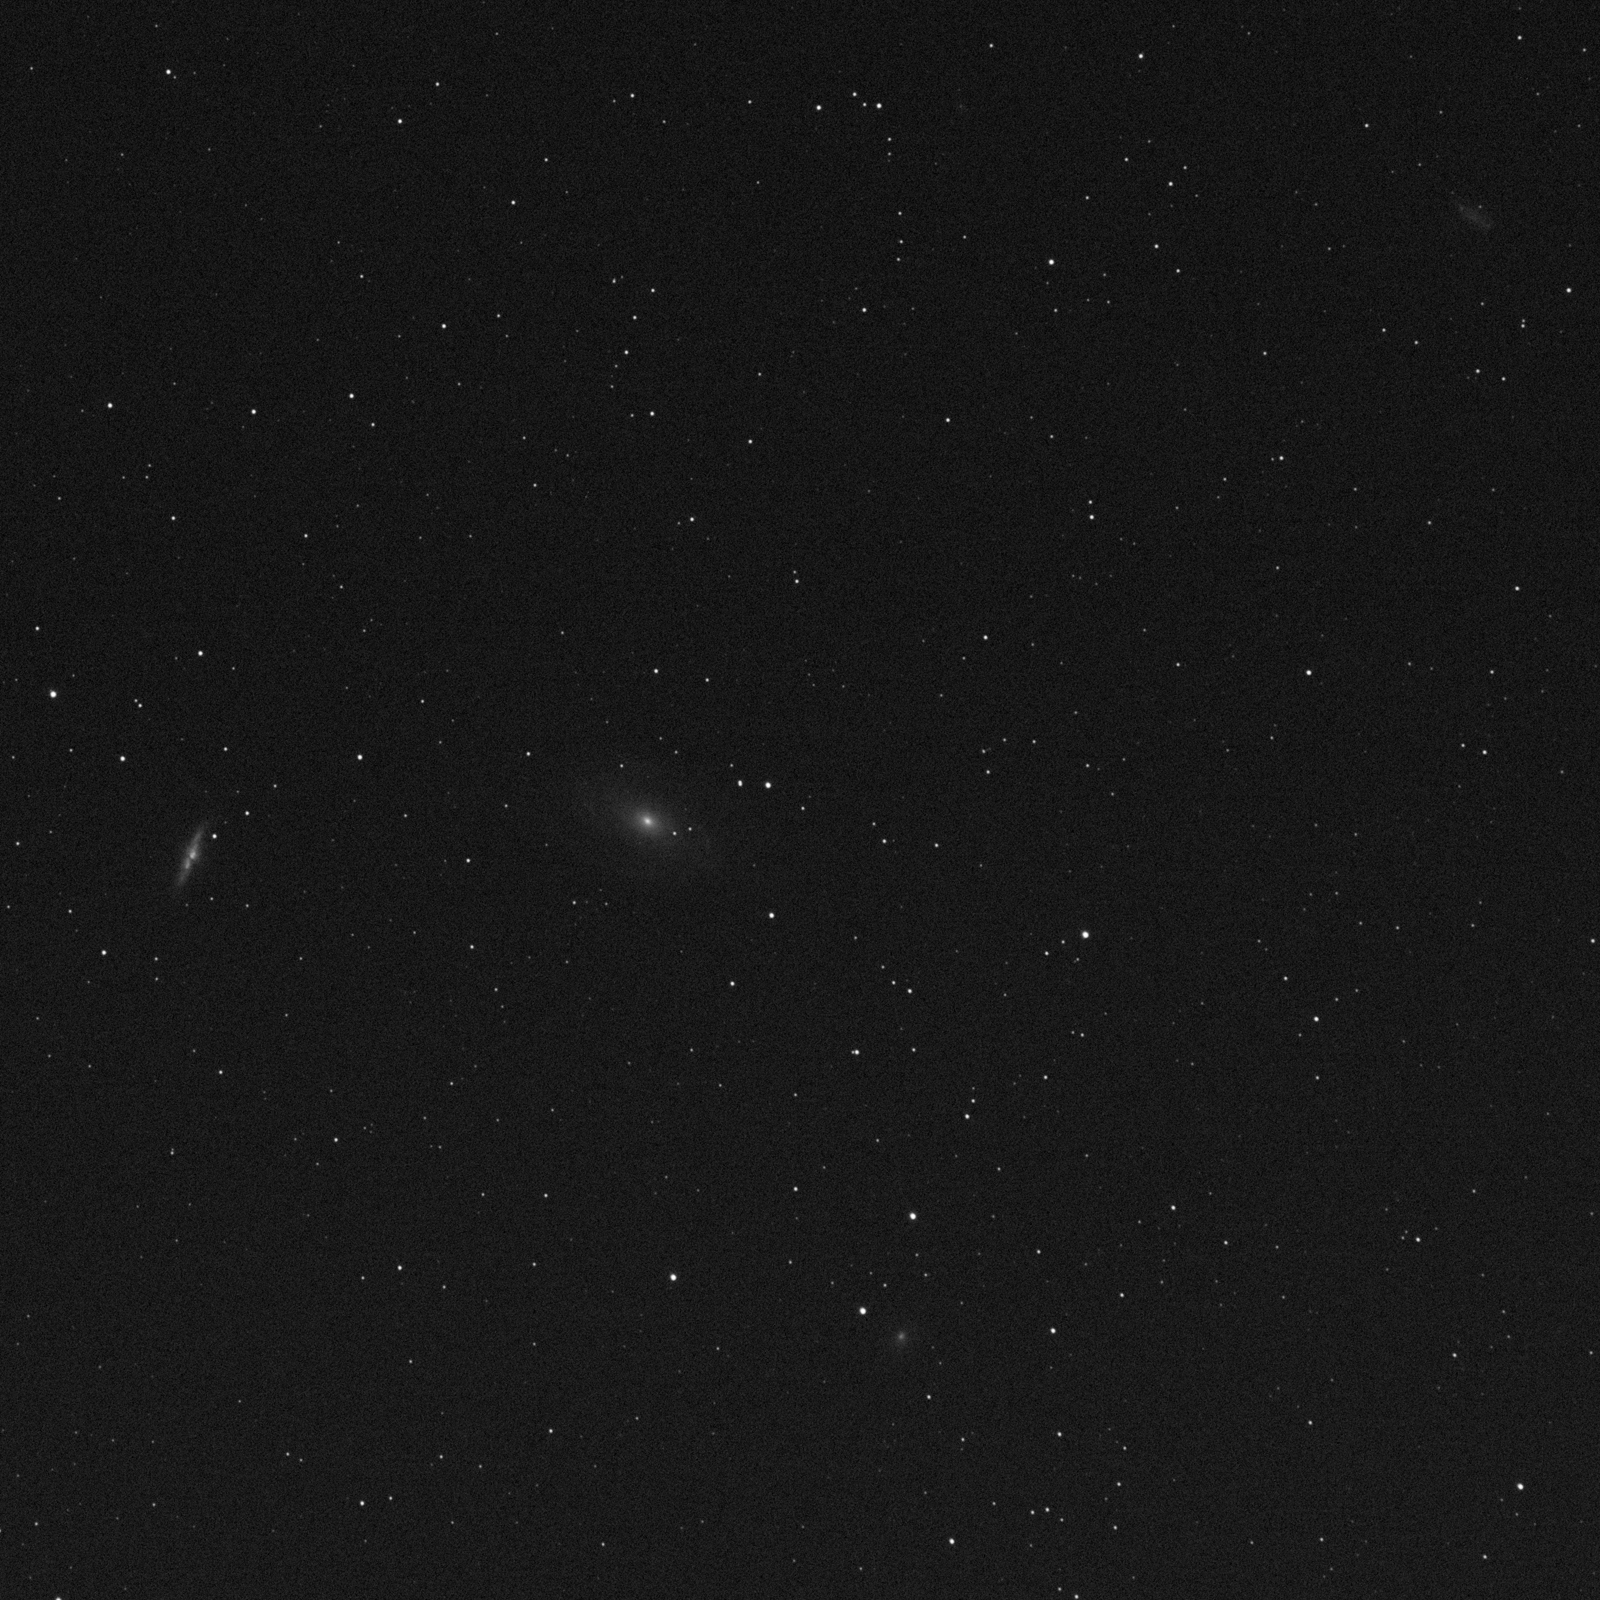 M81wide acl200 294mm g200 br15 Nbz 37F 555S NoEdit 12252022m